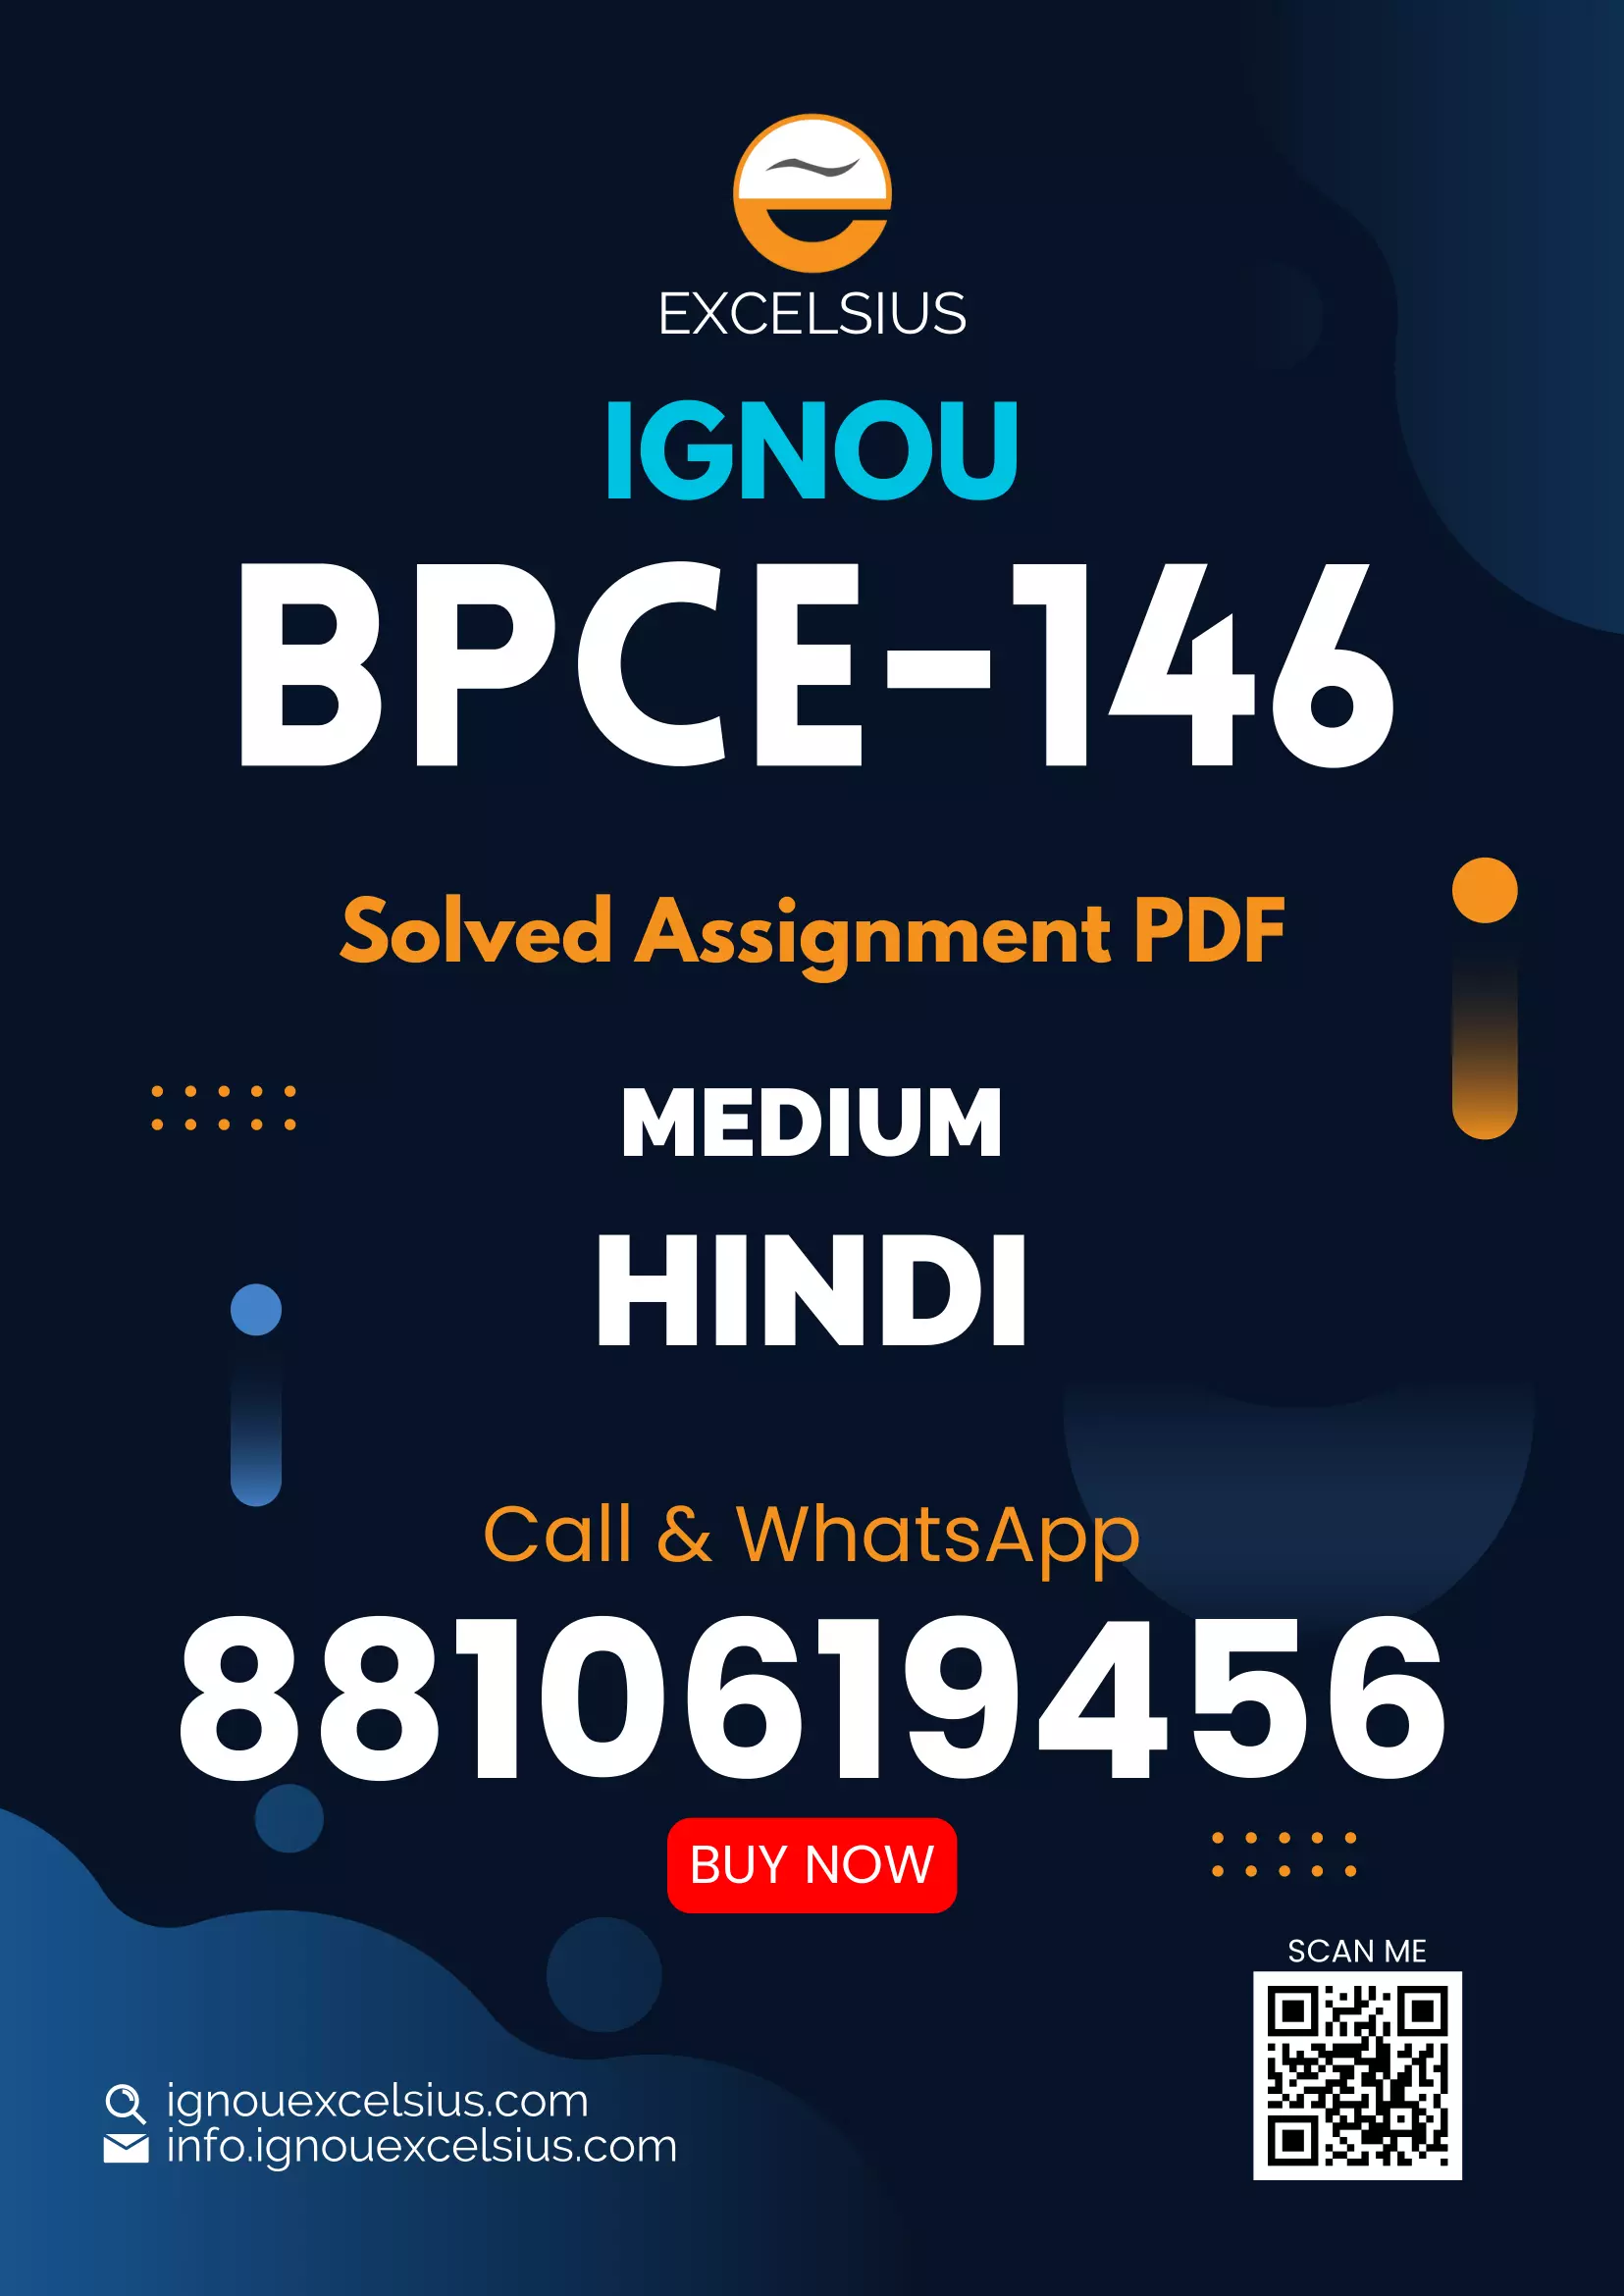 IGNOU BPCE-146 - Industrial/Organisational Psychology, Latest Solved Assignment-July 2022 – January 2023